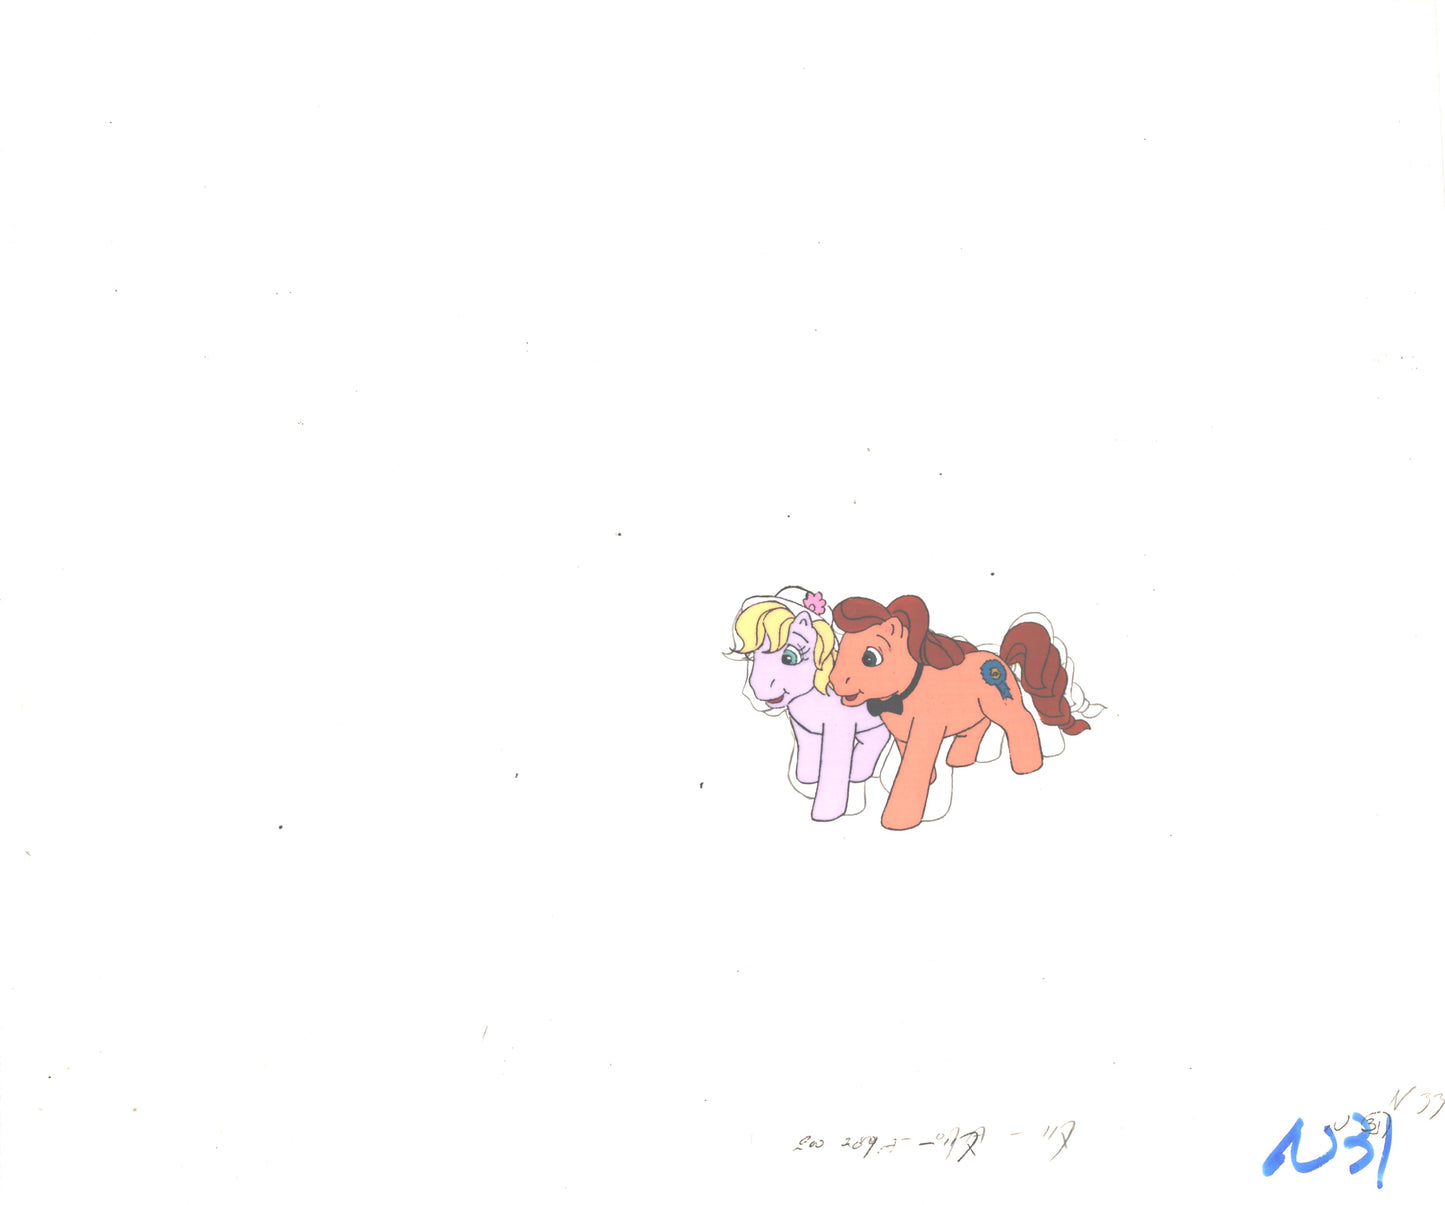 My Little Pony Original Production Animation Cel Hasbro Sunbow 1980s or 90s Used to Make the Cartoon G-N31